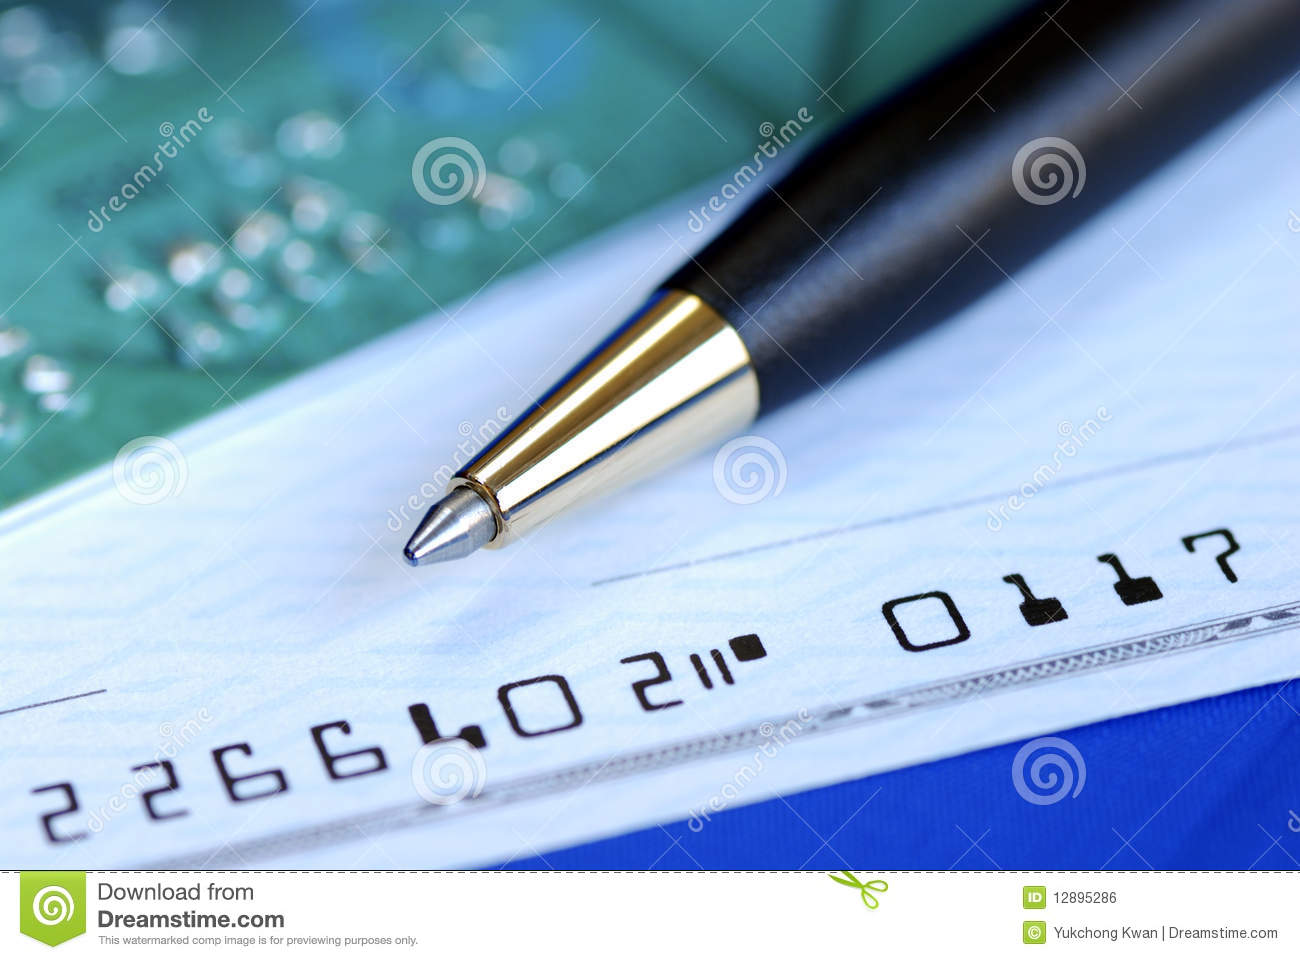 Write A Check To Pay The Credit Card Bill Royalty Free Stock Image